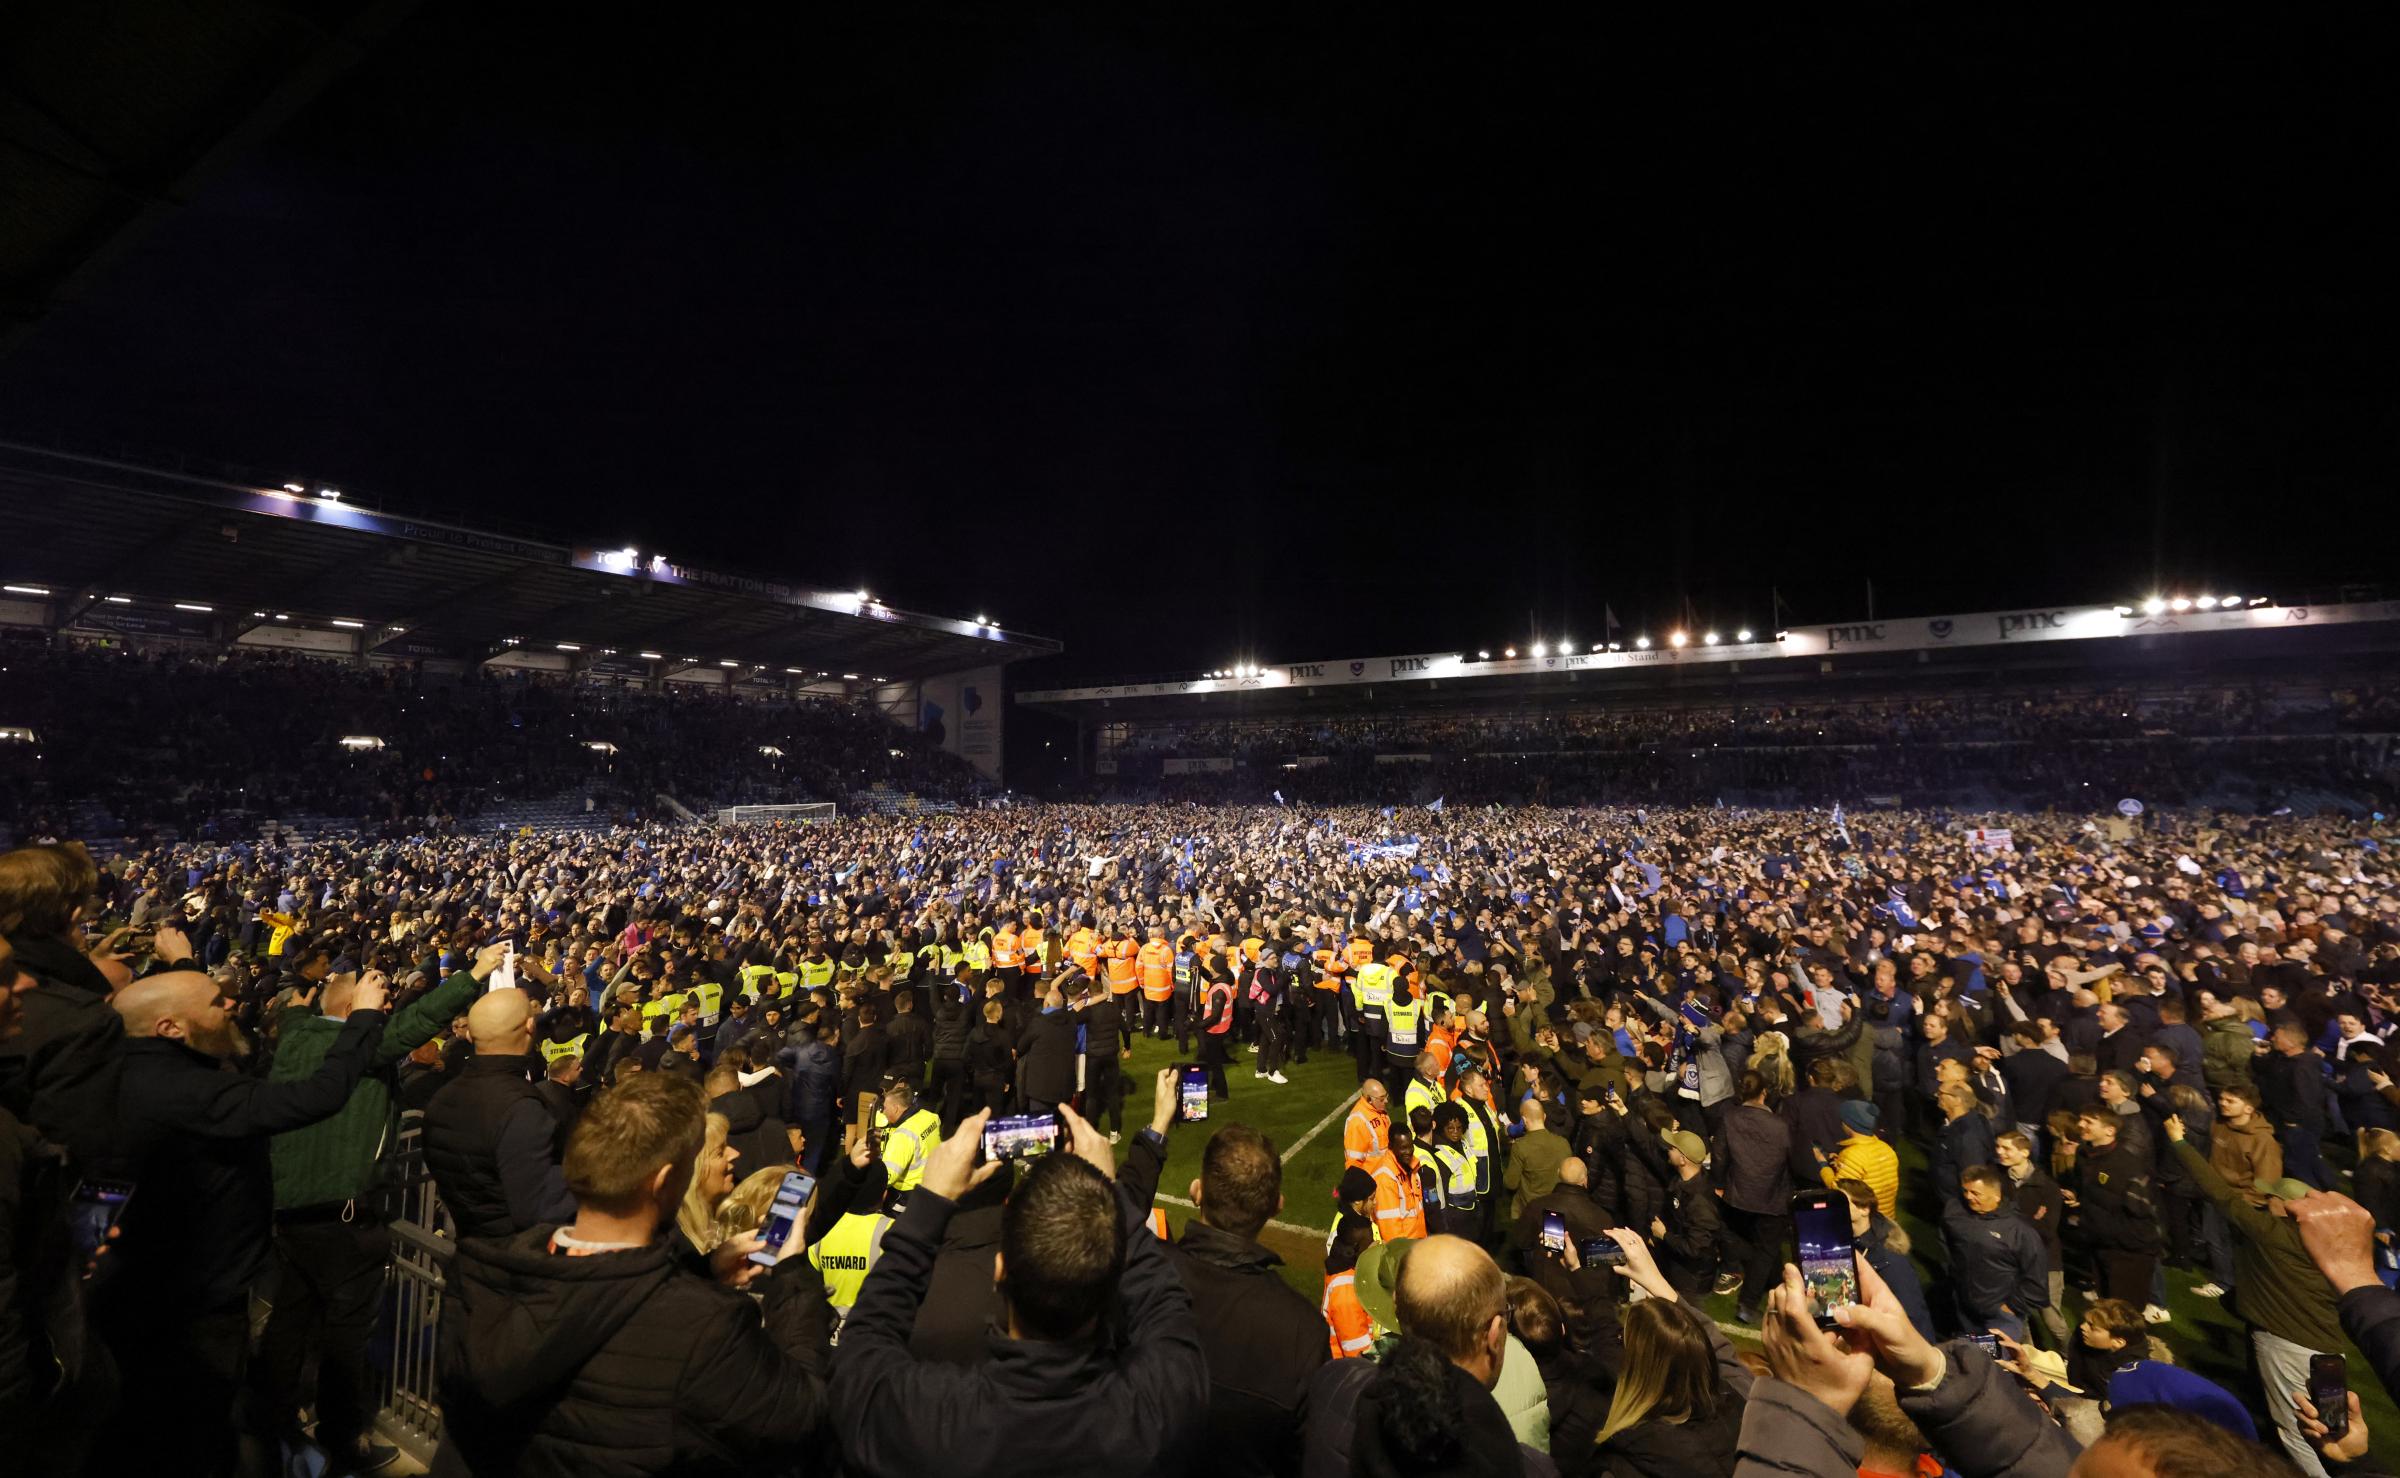 Portsmouth promoted to the Championship as League One champions